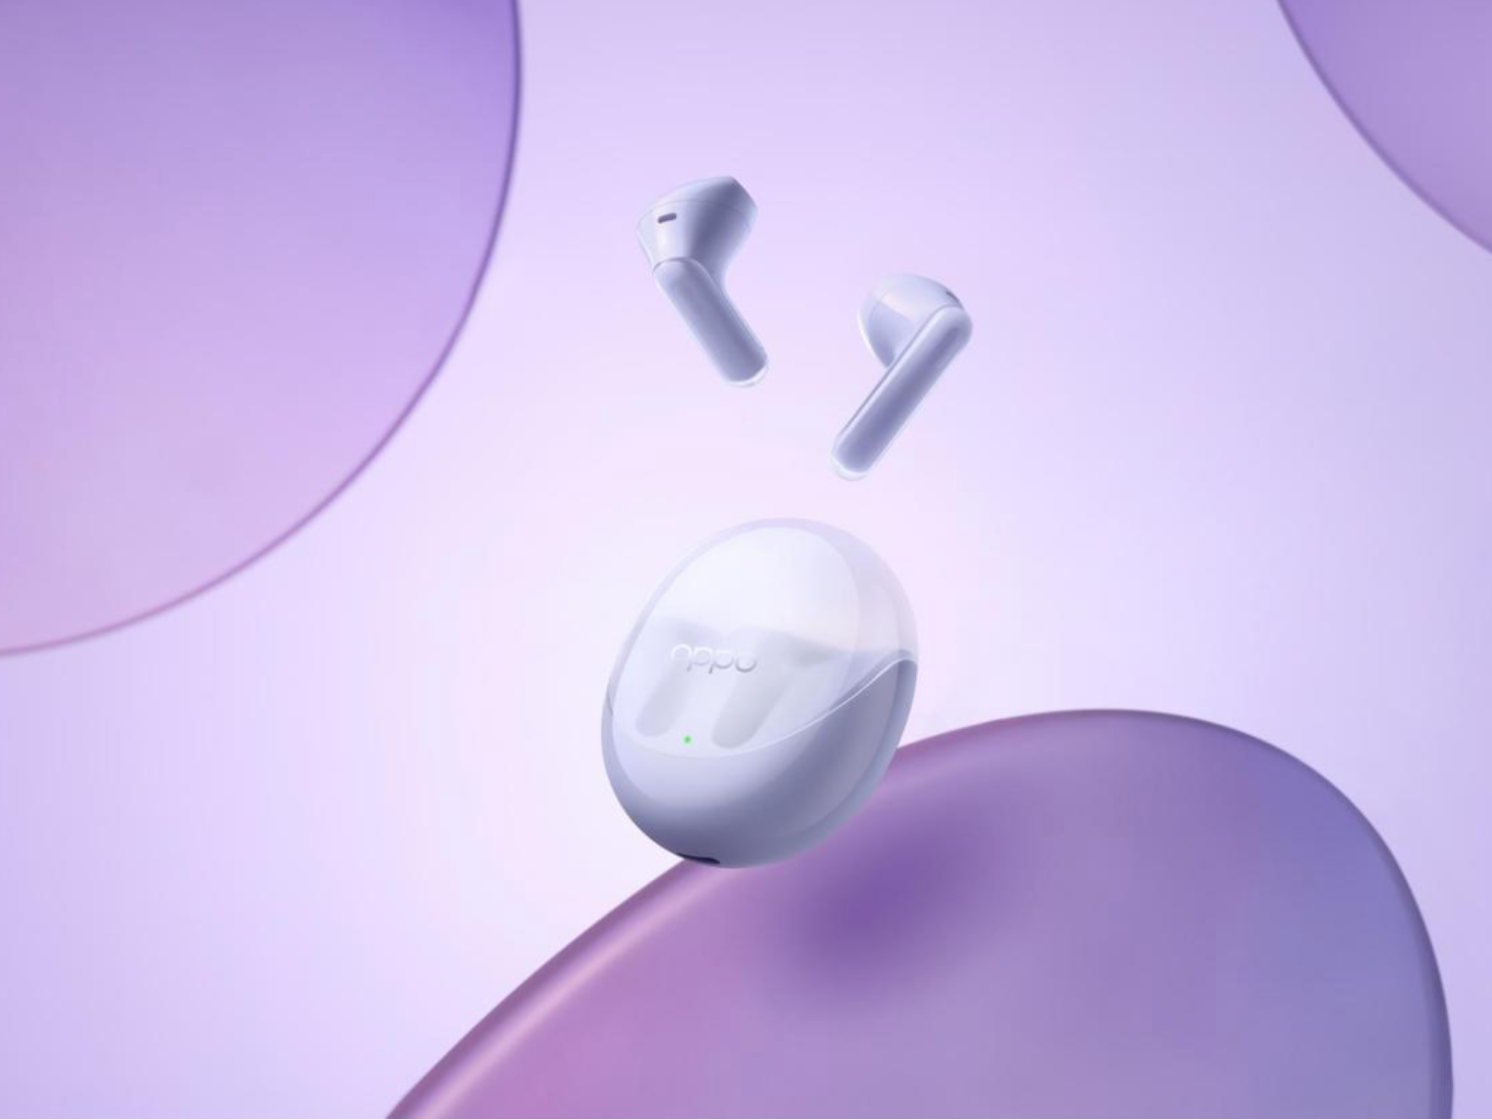 Infographic] Galaxy Buds2 Pro: Taking Immersive Sound Deeper With